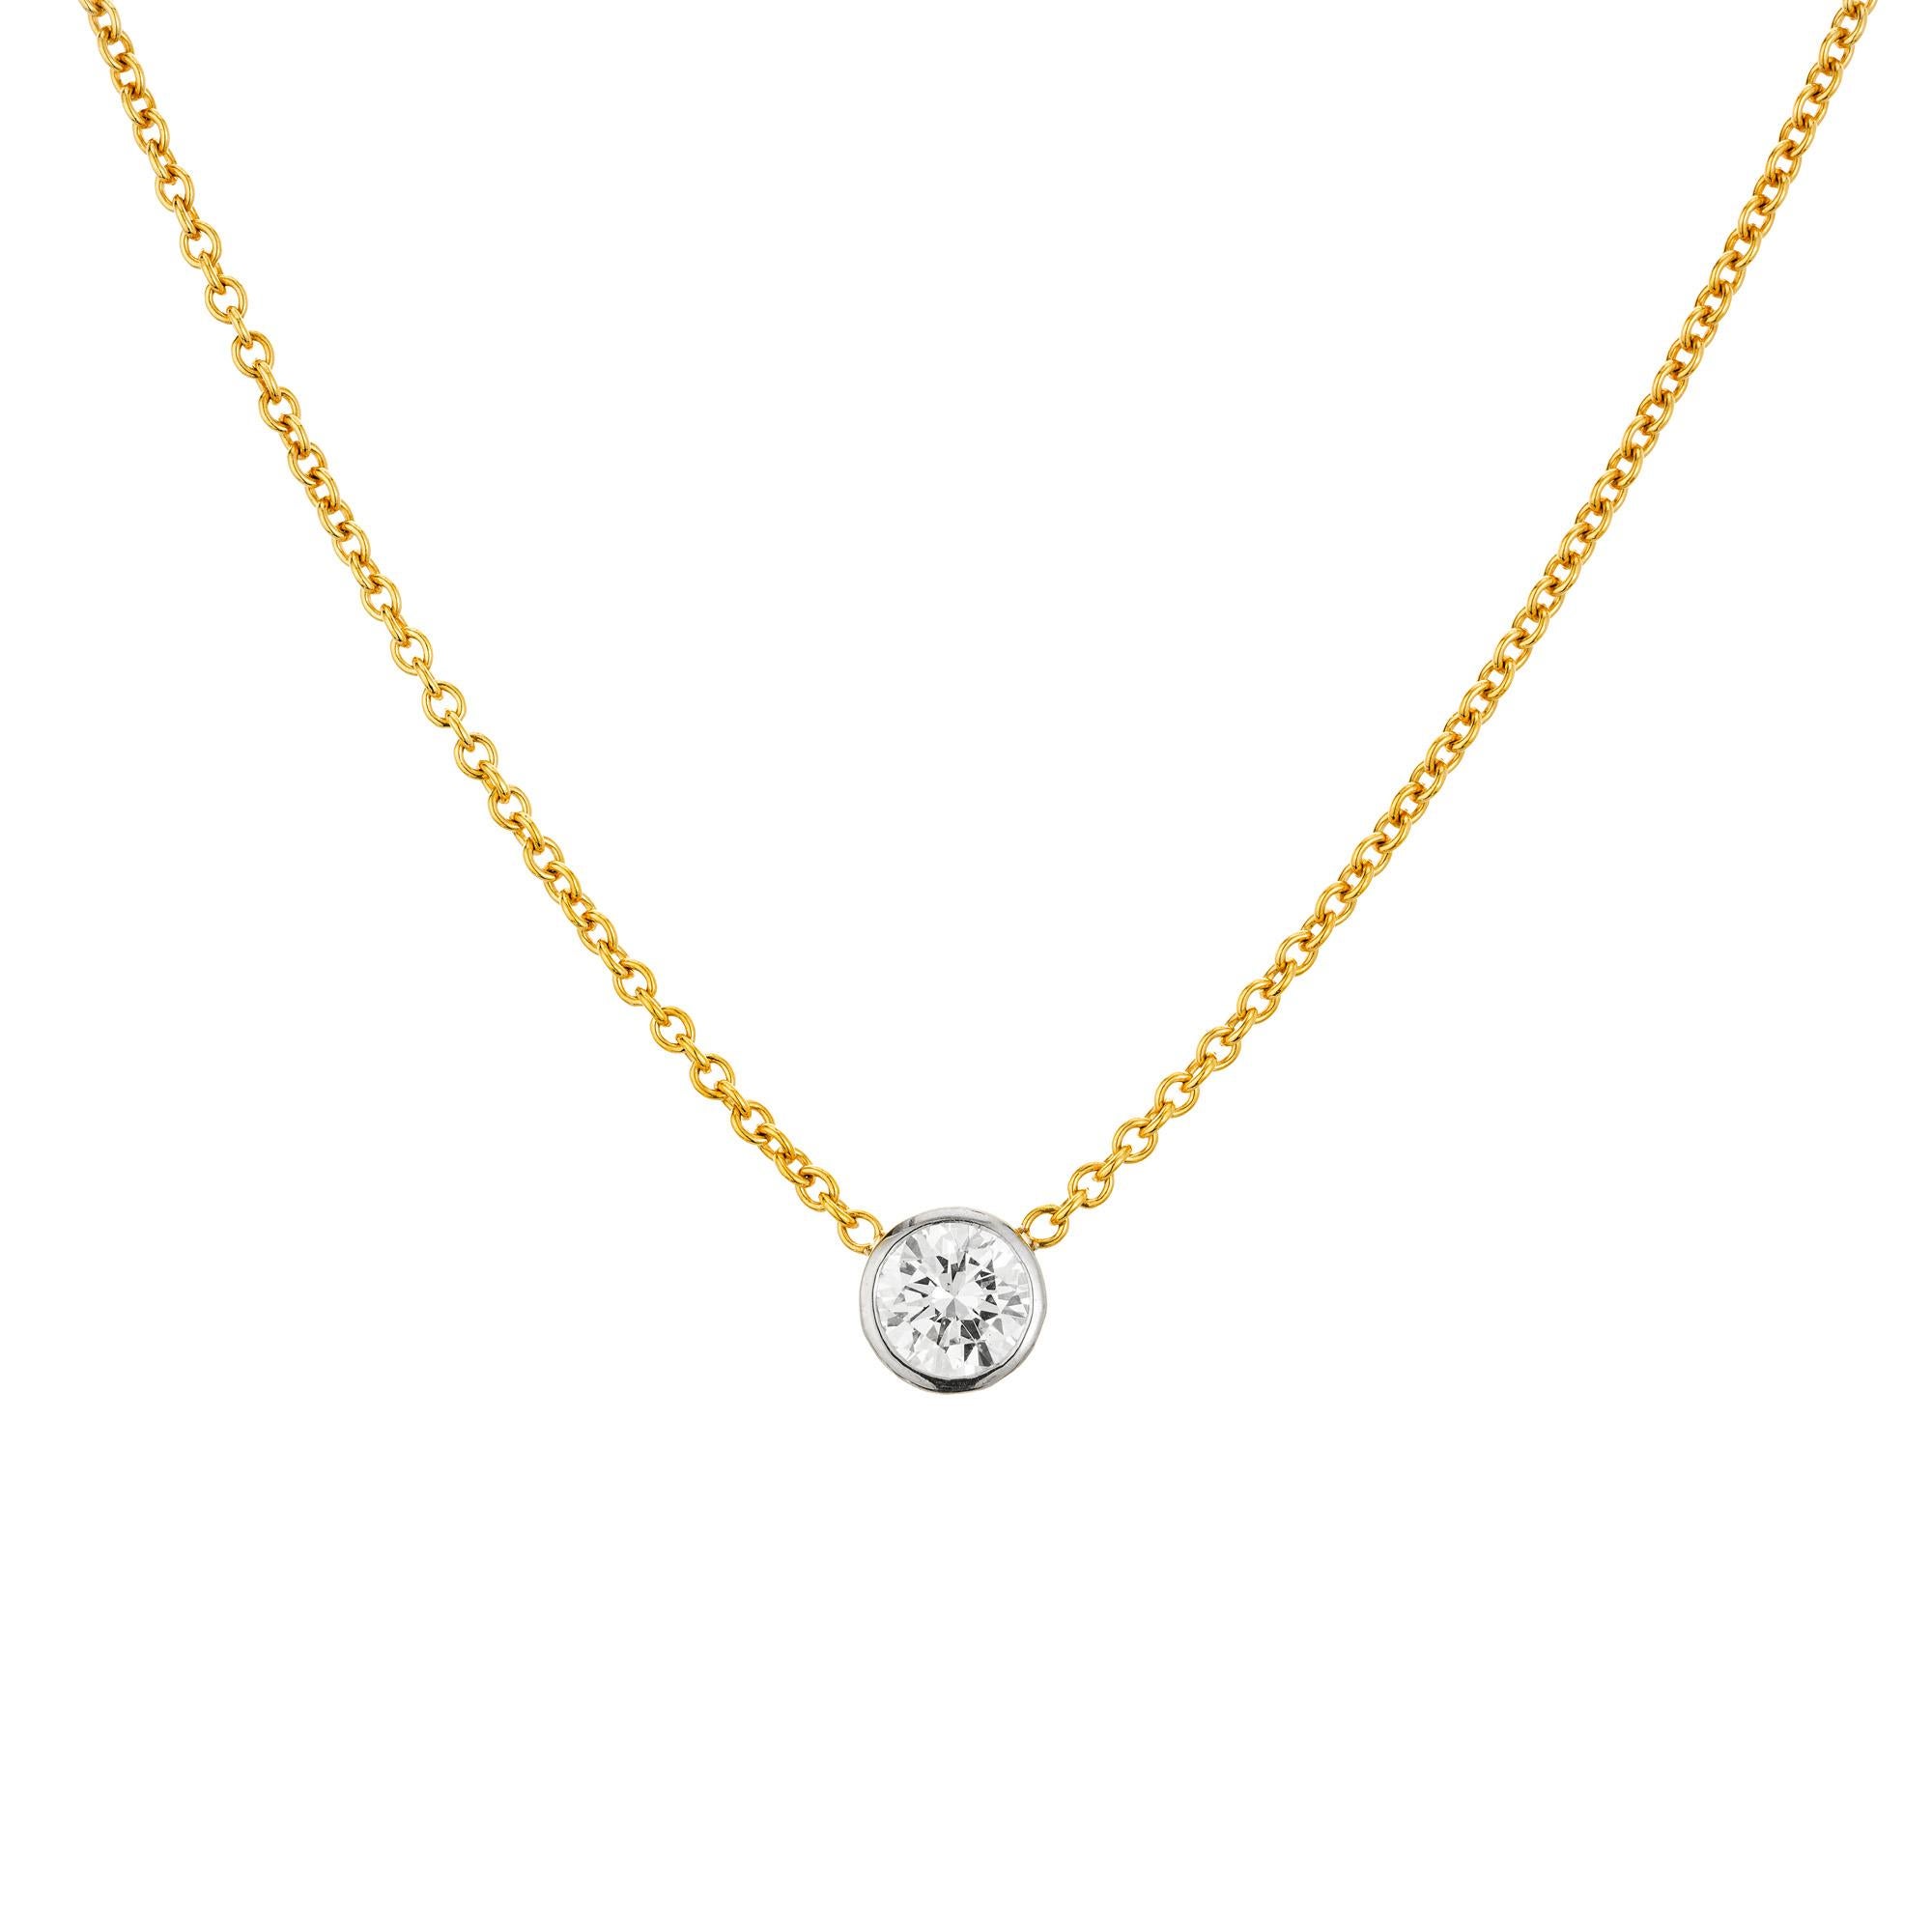 Classic diamond pendant necklace. The center piece of this necklace is the .95ct 18k white gold bezel set round brilliant cut diamond, which is accented with a 16.5 inch cable link 18k yellow gold chain. The EGL has certified this as G-H near